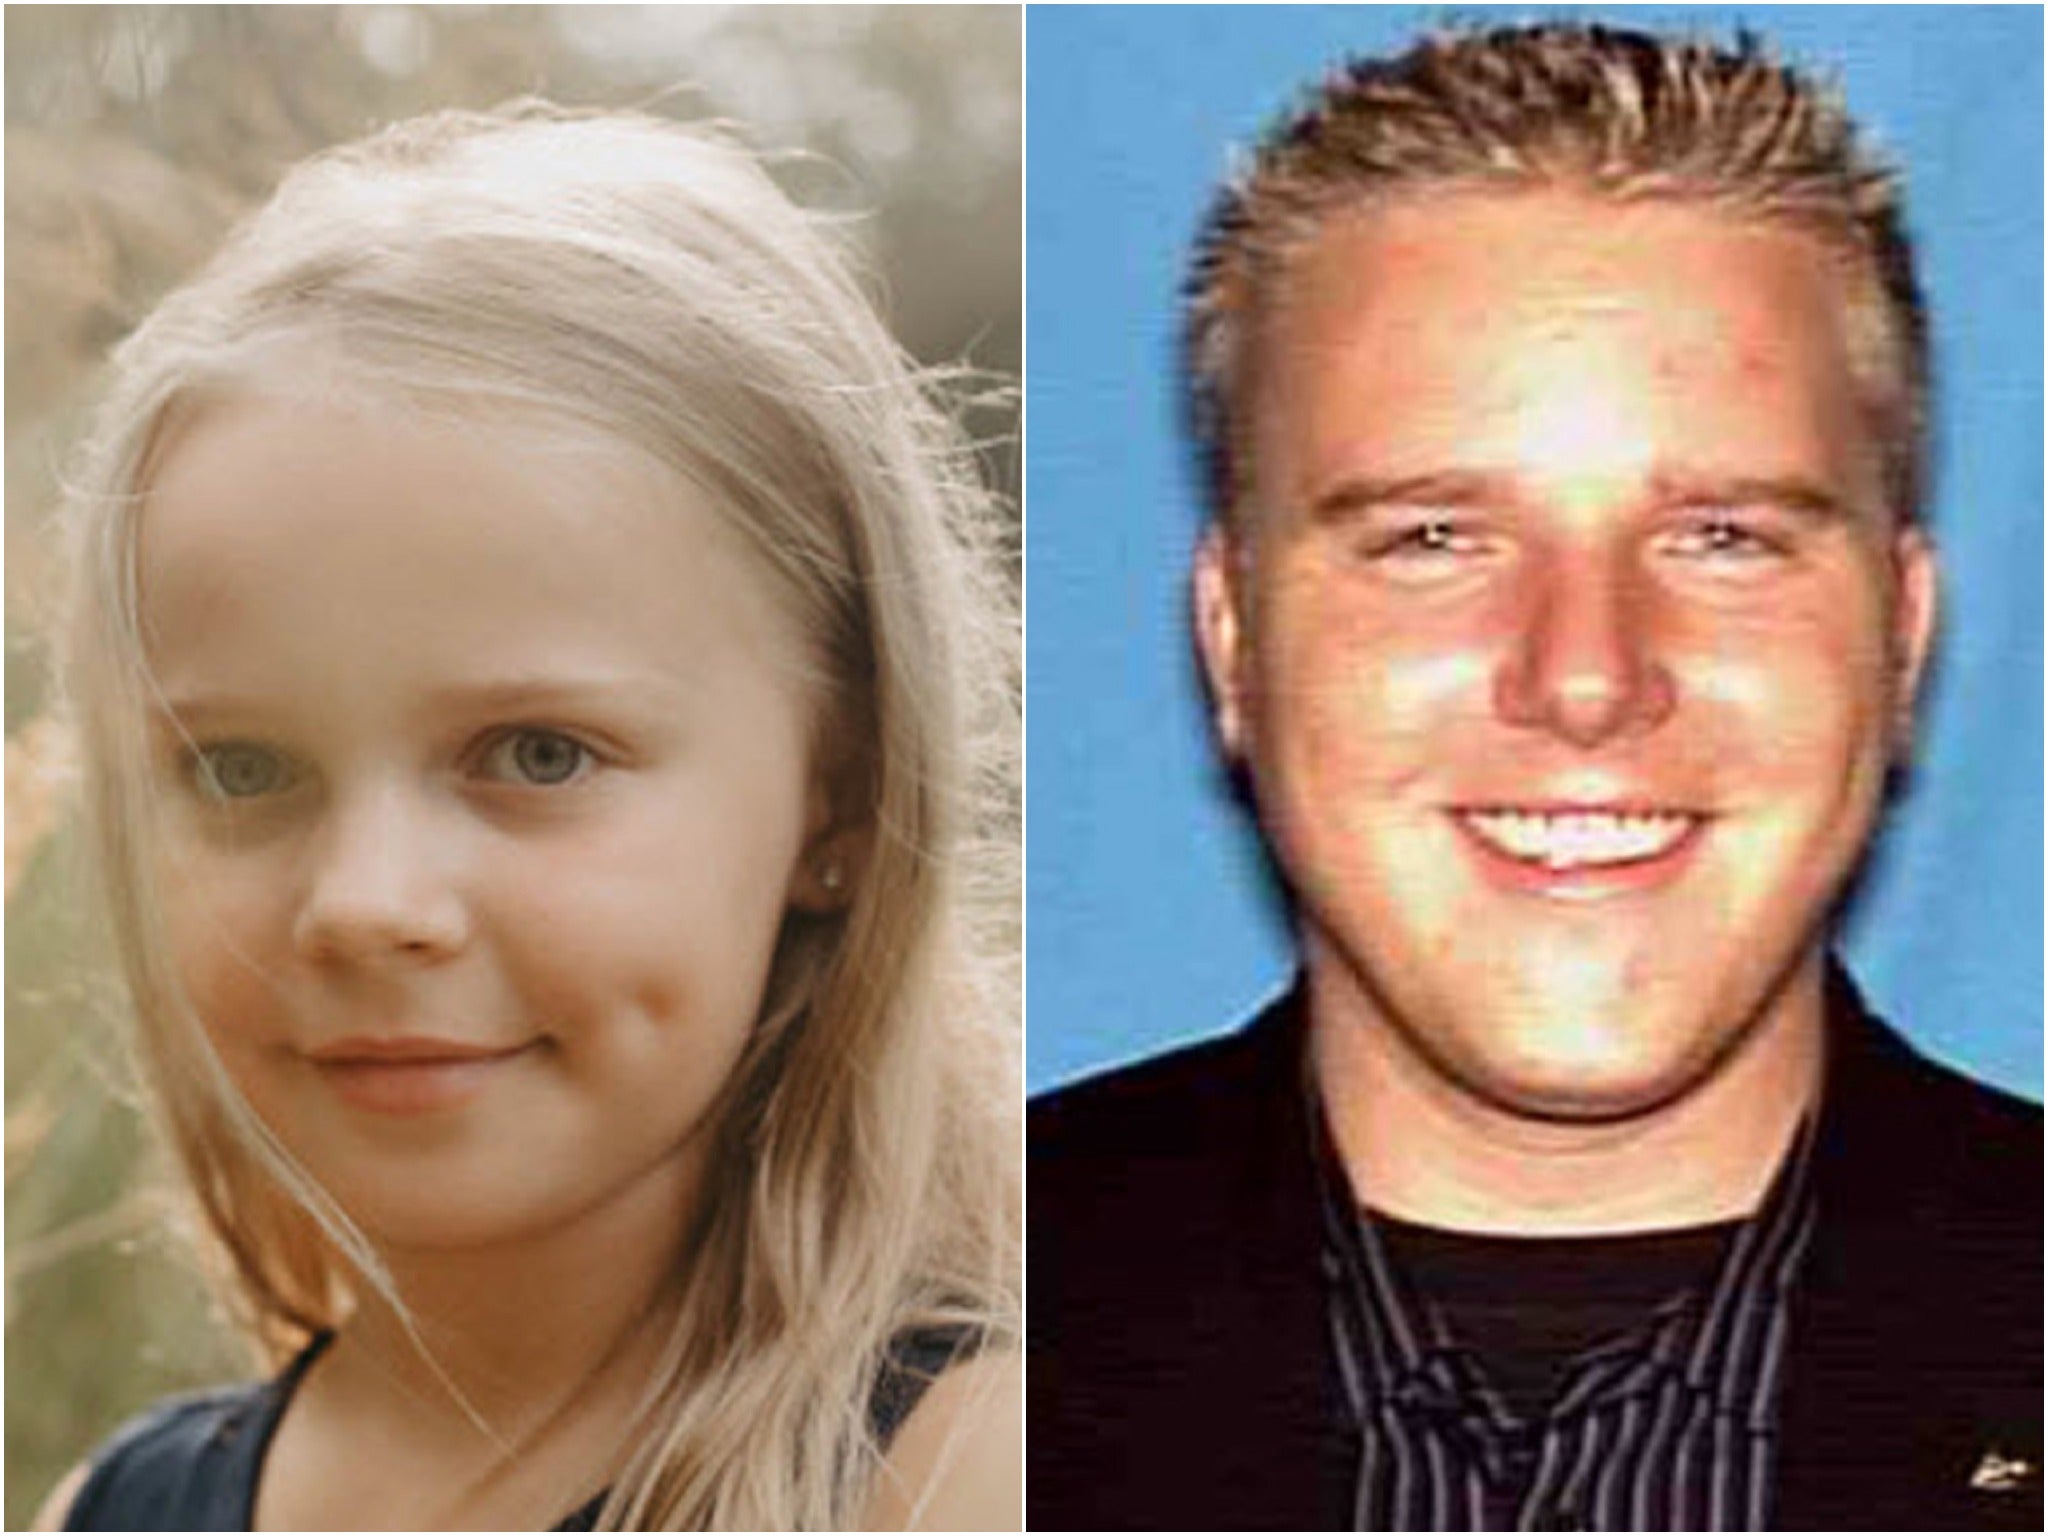 Sophie Long, 11, has been found in a foreign country and her father, Michael Long, is in police custody